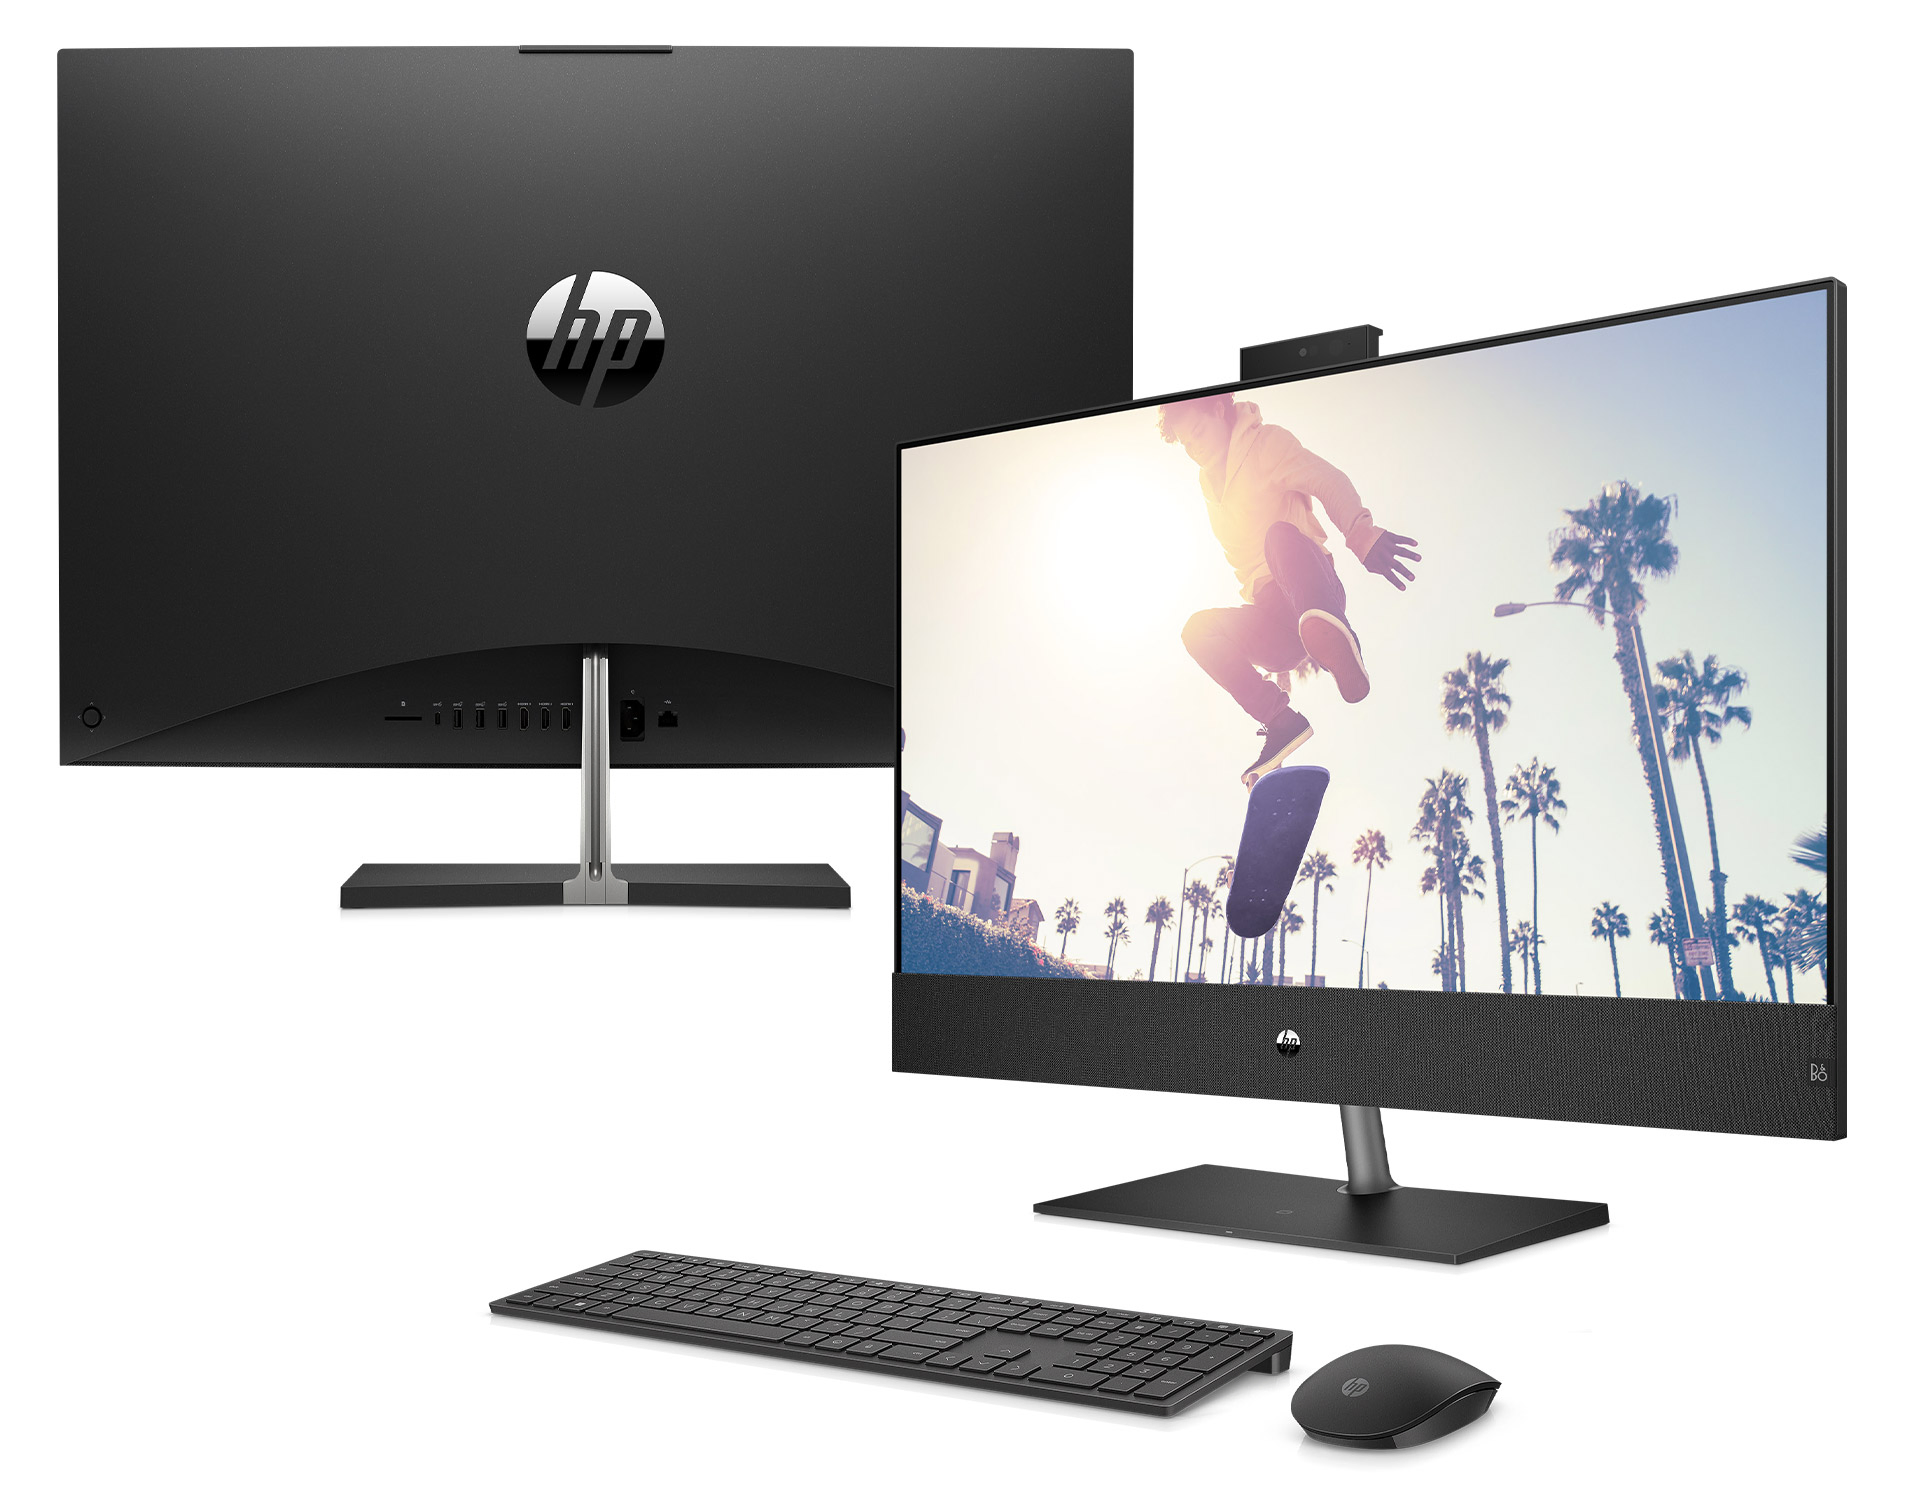 HP Pavilion All-in-One 32 製品詳細 - デスクトップパソコン | 日本HP